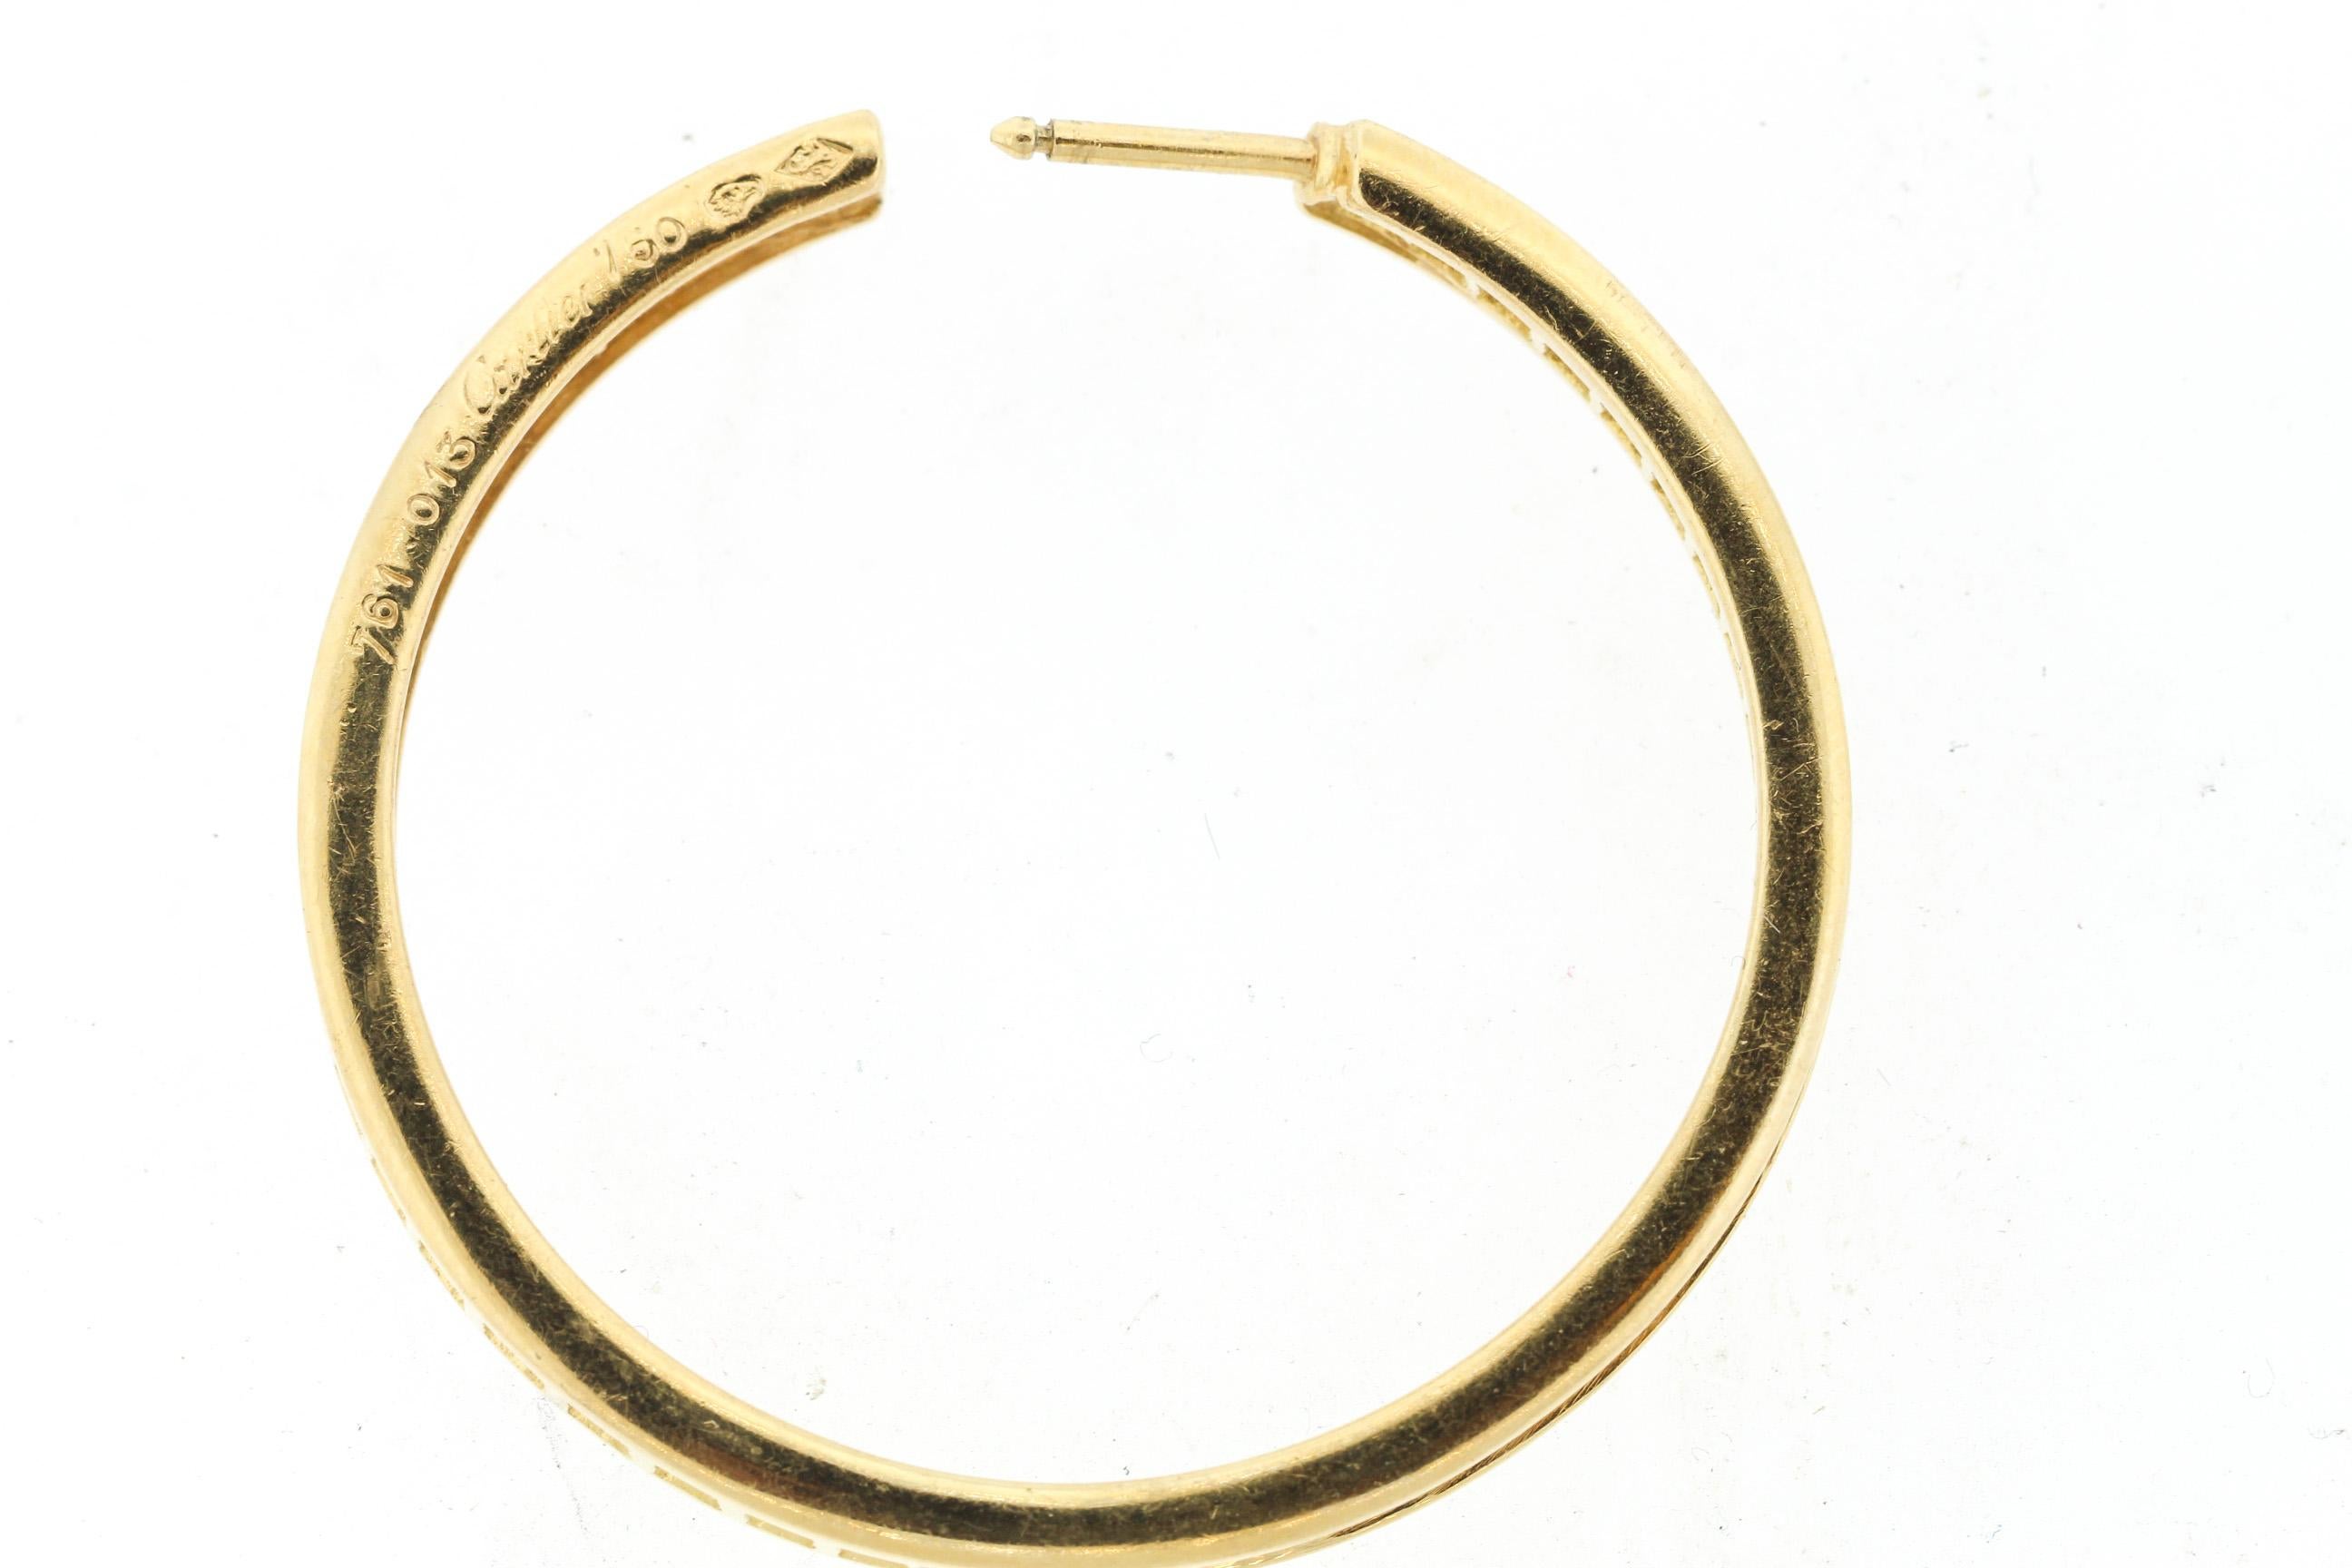 Classic 18k yellow gold diamond hoop earrings by Cartier circa 2000. The larger size hoop earrings are made with an inside out design where the diamonds are visible from all angles. The earrings make a statement and yet timeless in design. The